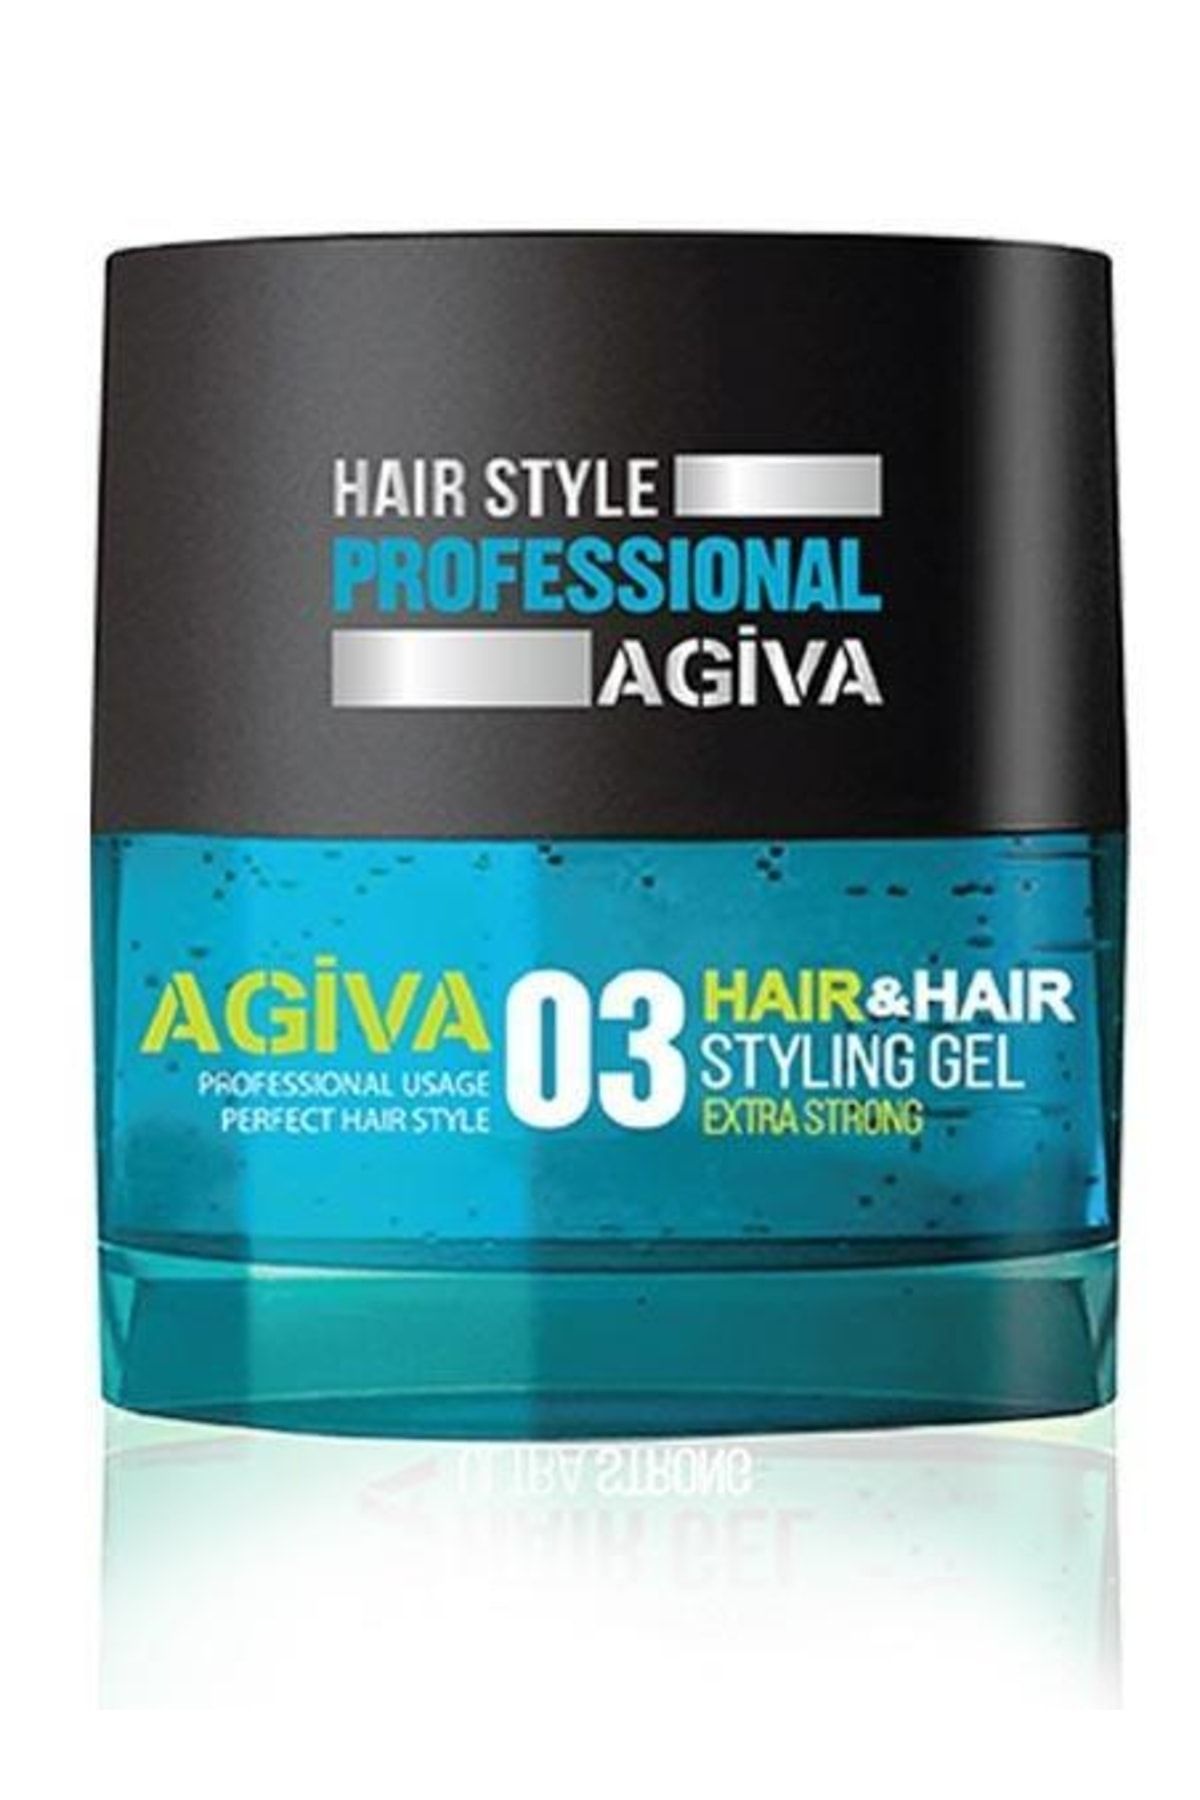 Agiva Hair Styling Gel 03 Extra Strong 200 ml